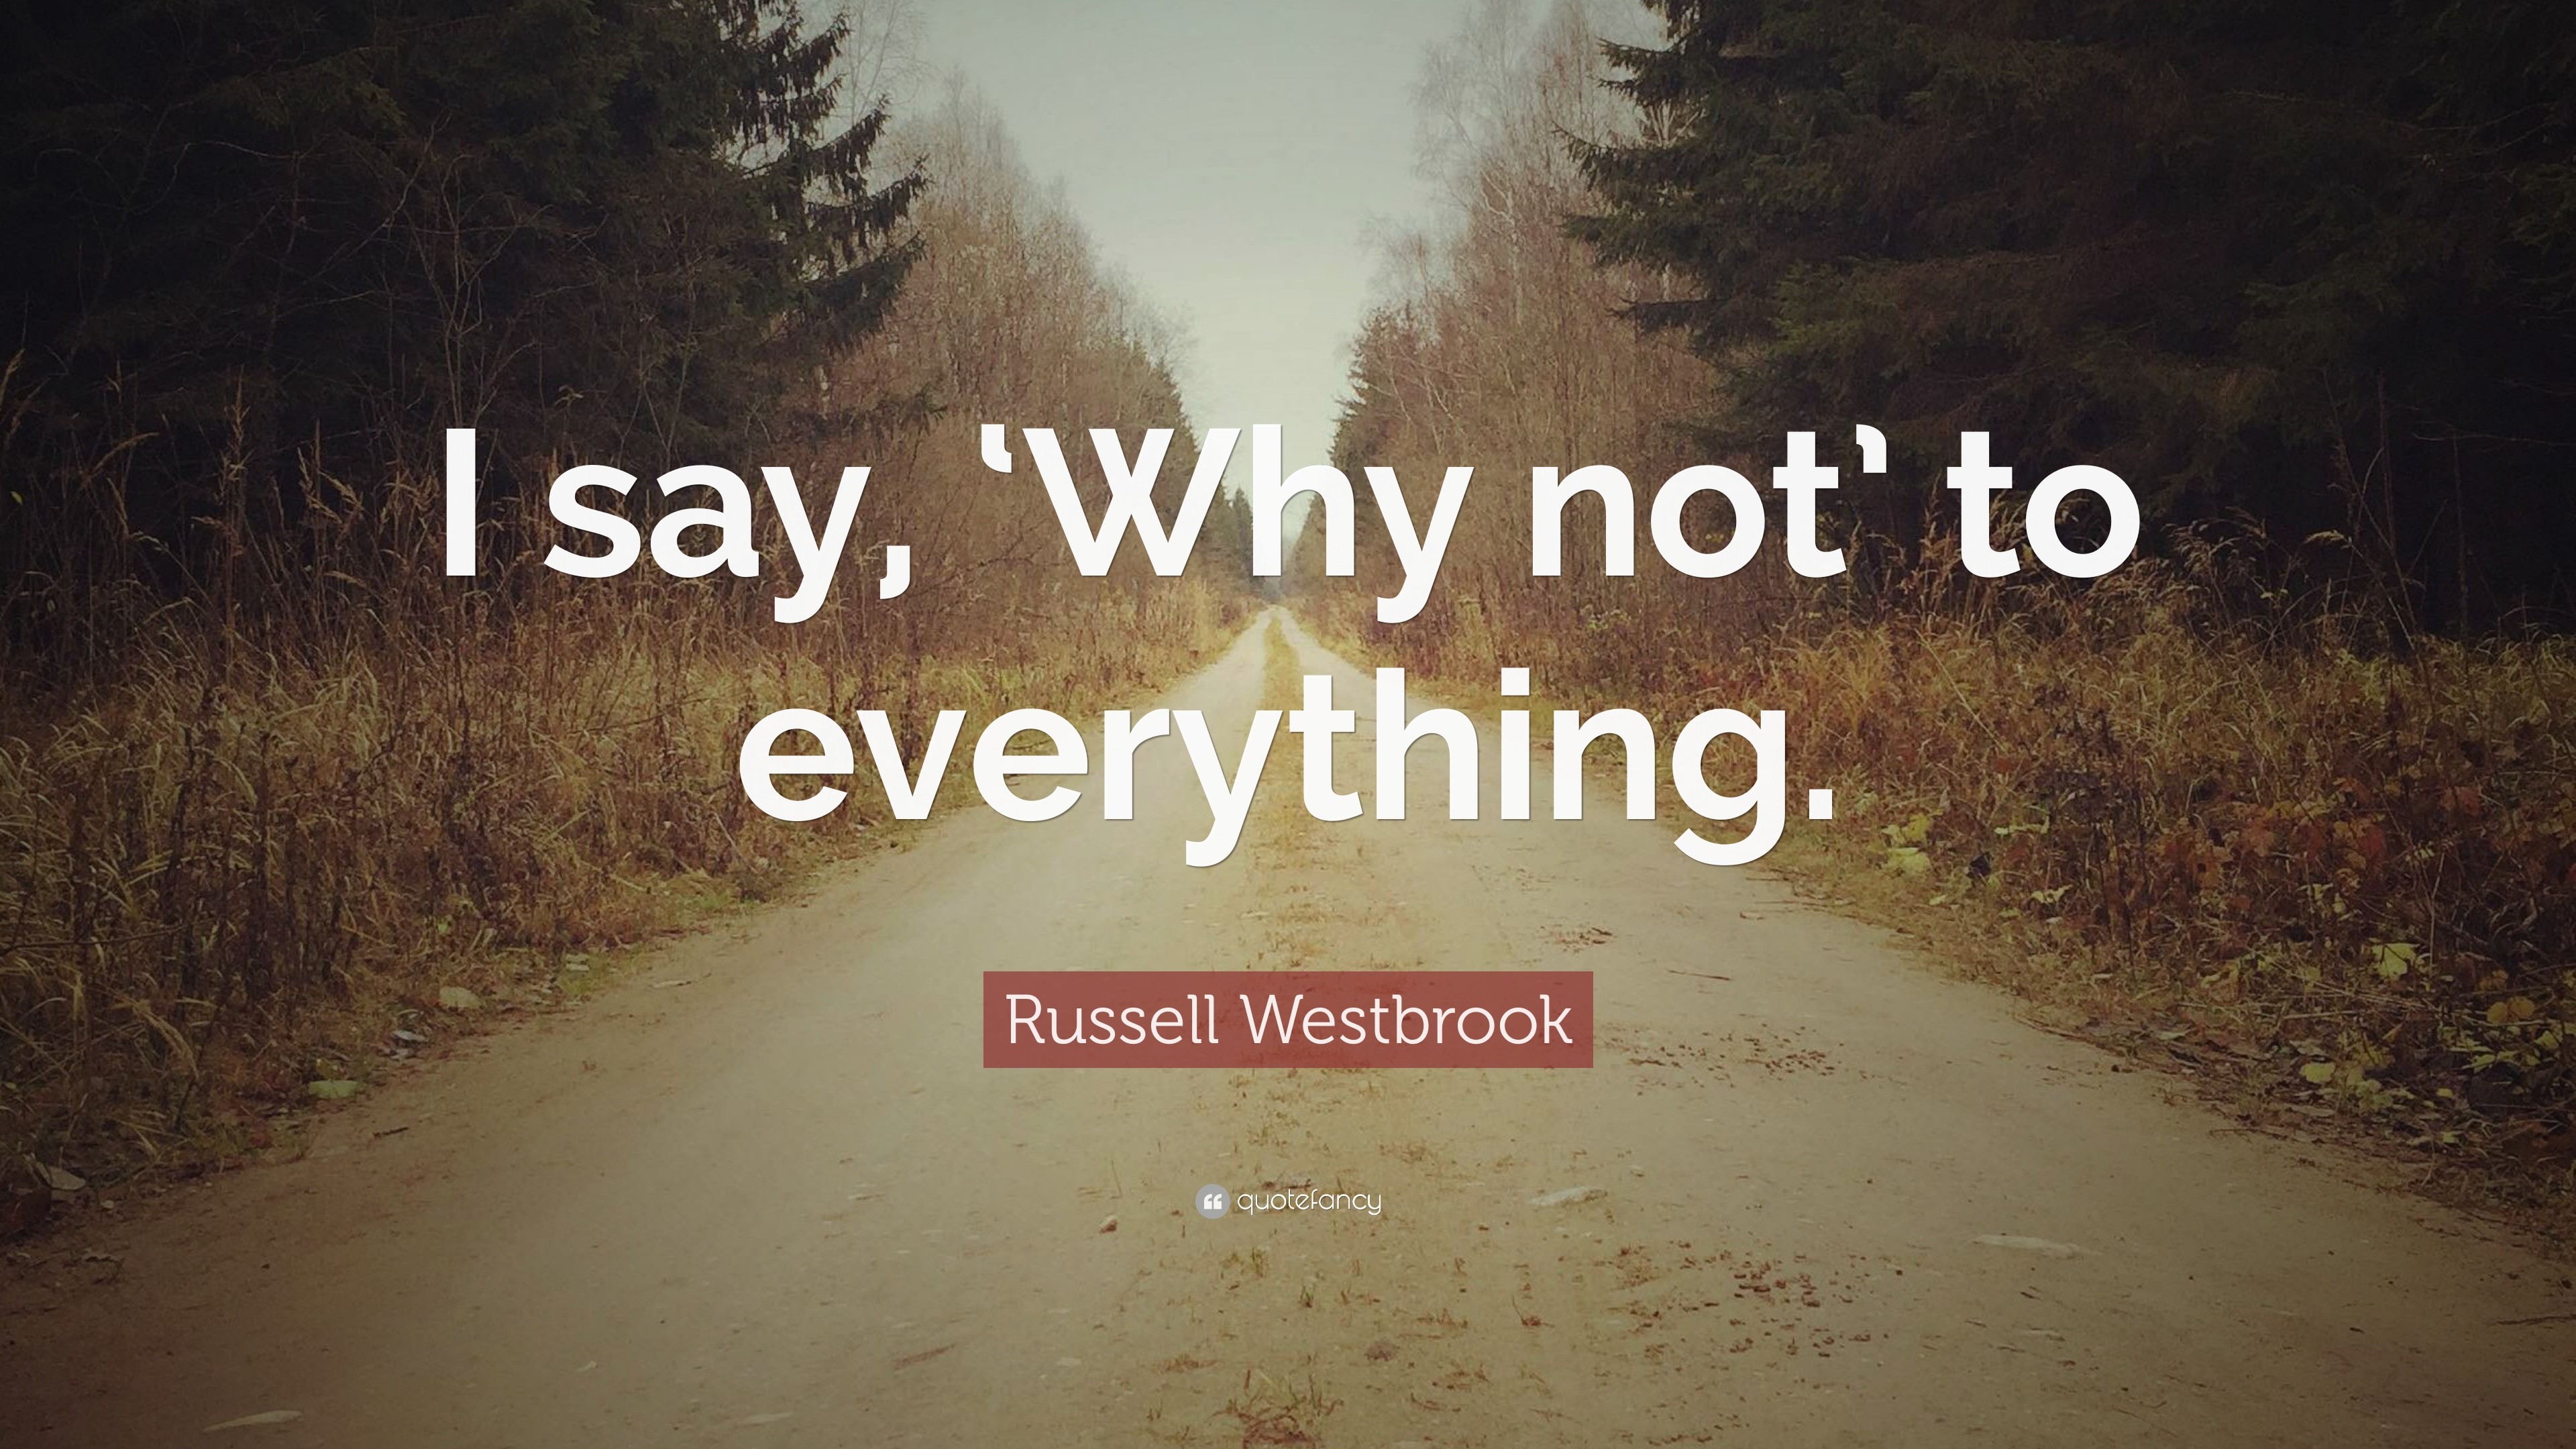 3840x2160 Russell Westbrook Quotes (17 wallpapers) - Quotefancy